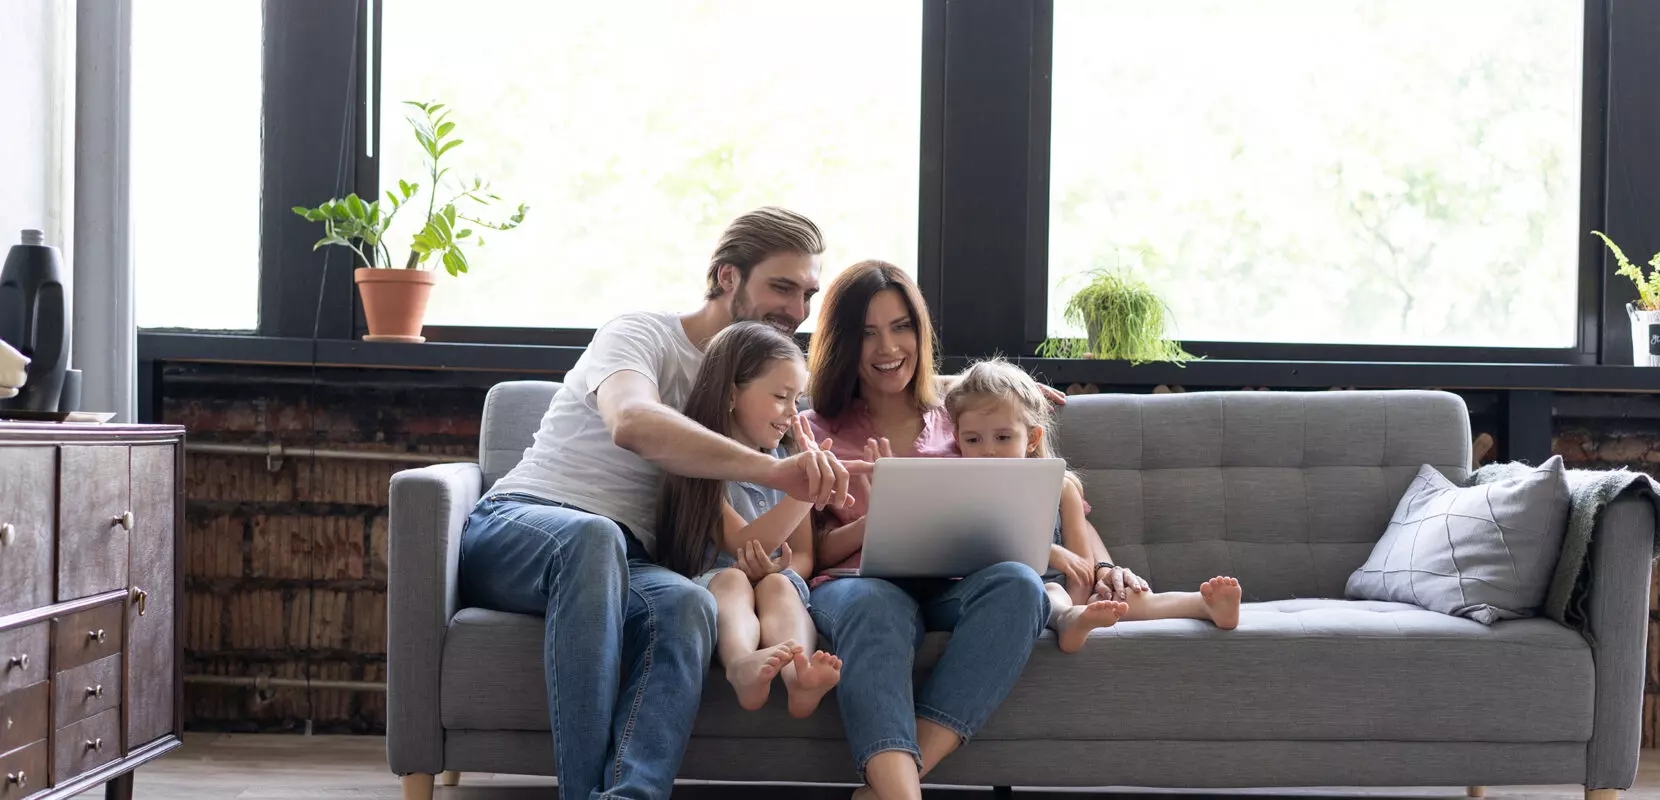 parents sitting on the couch with their children smiling and looking at the computer